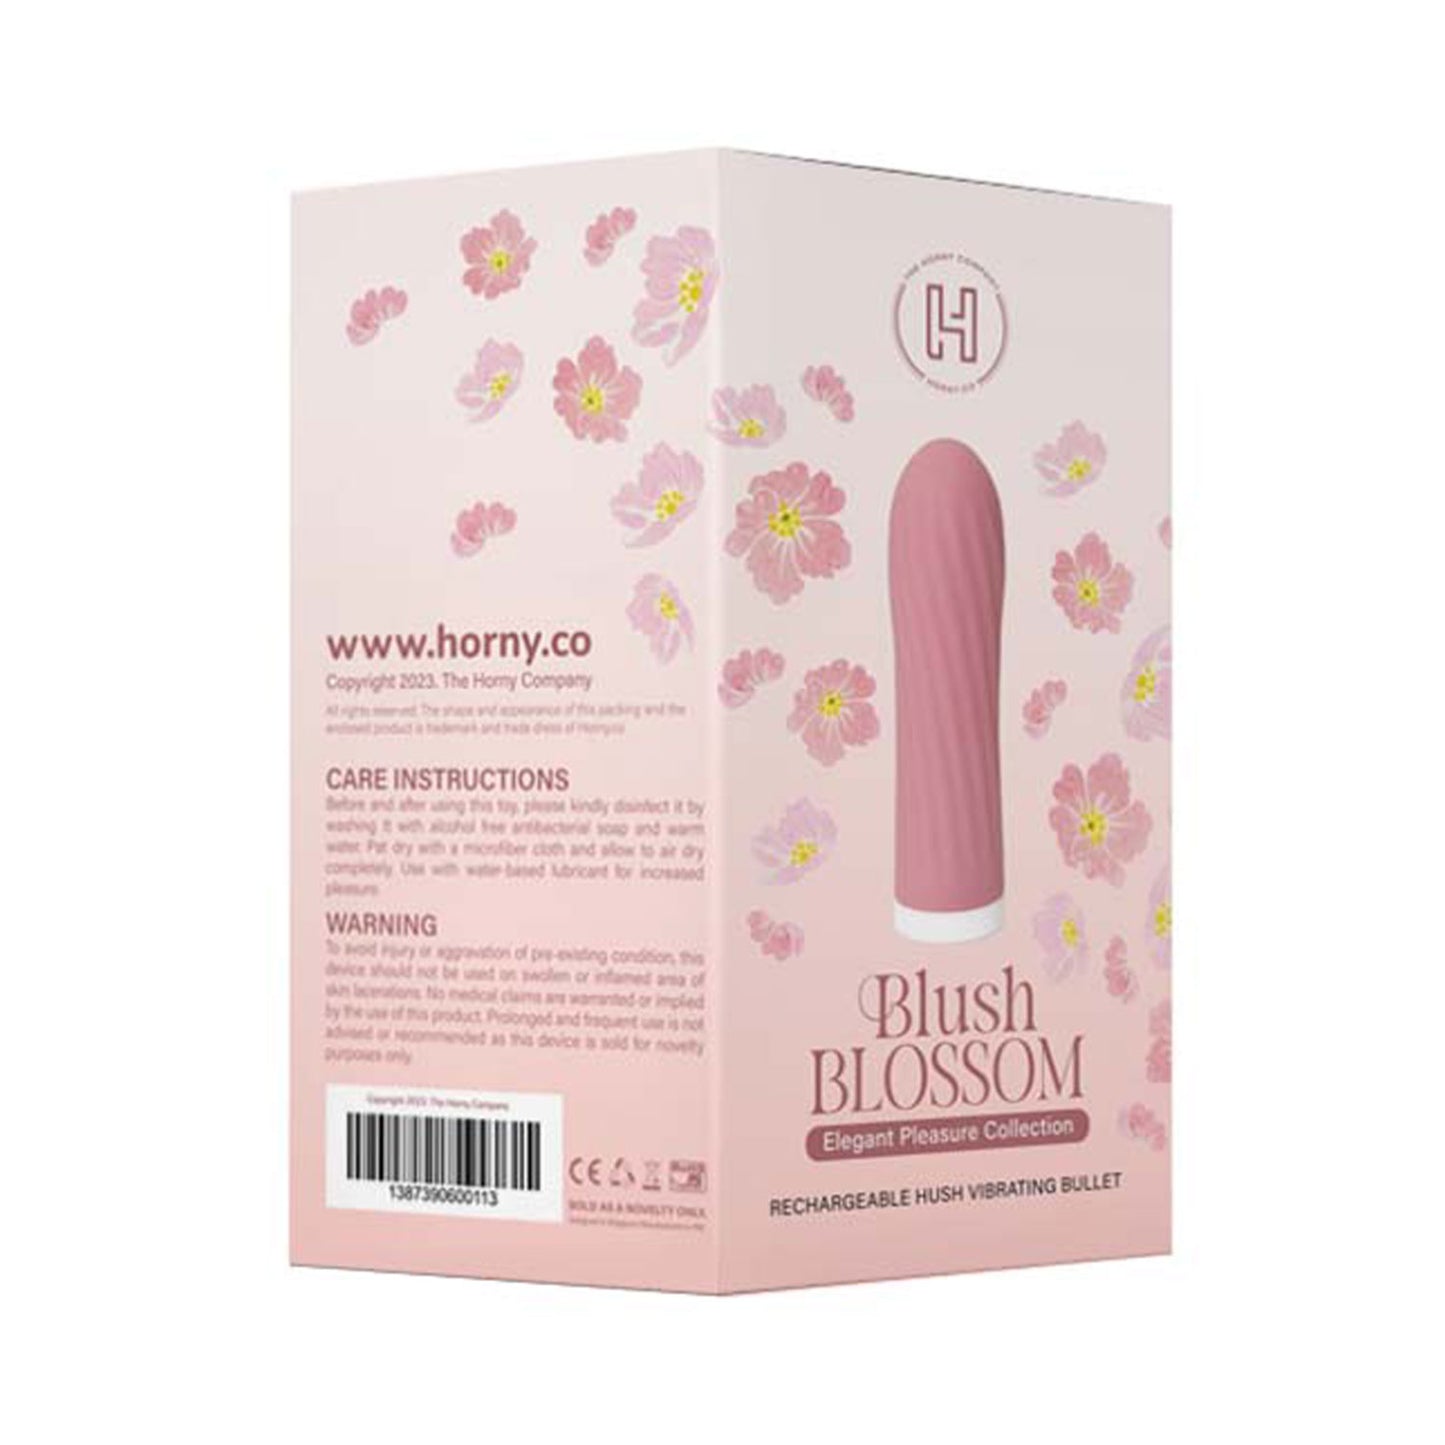 The Horny Company - Blush Blossom Collection Rechargeable Hush Vibrating Bullet